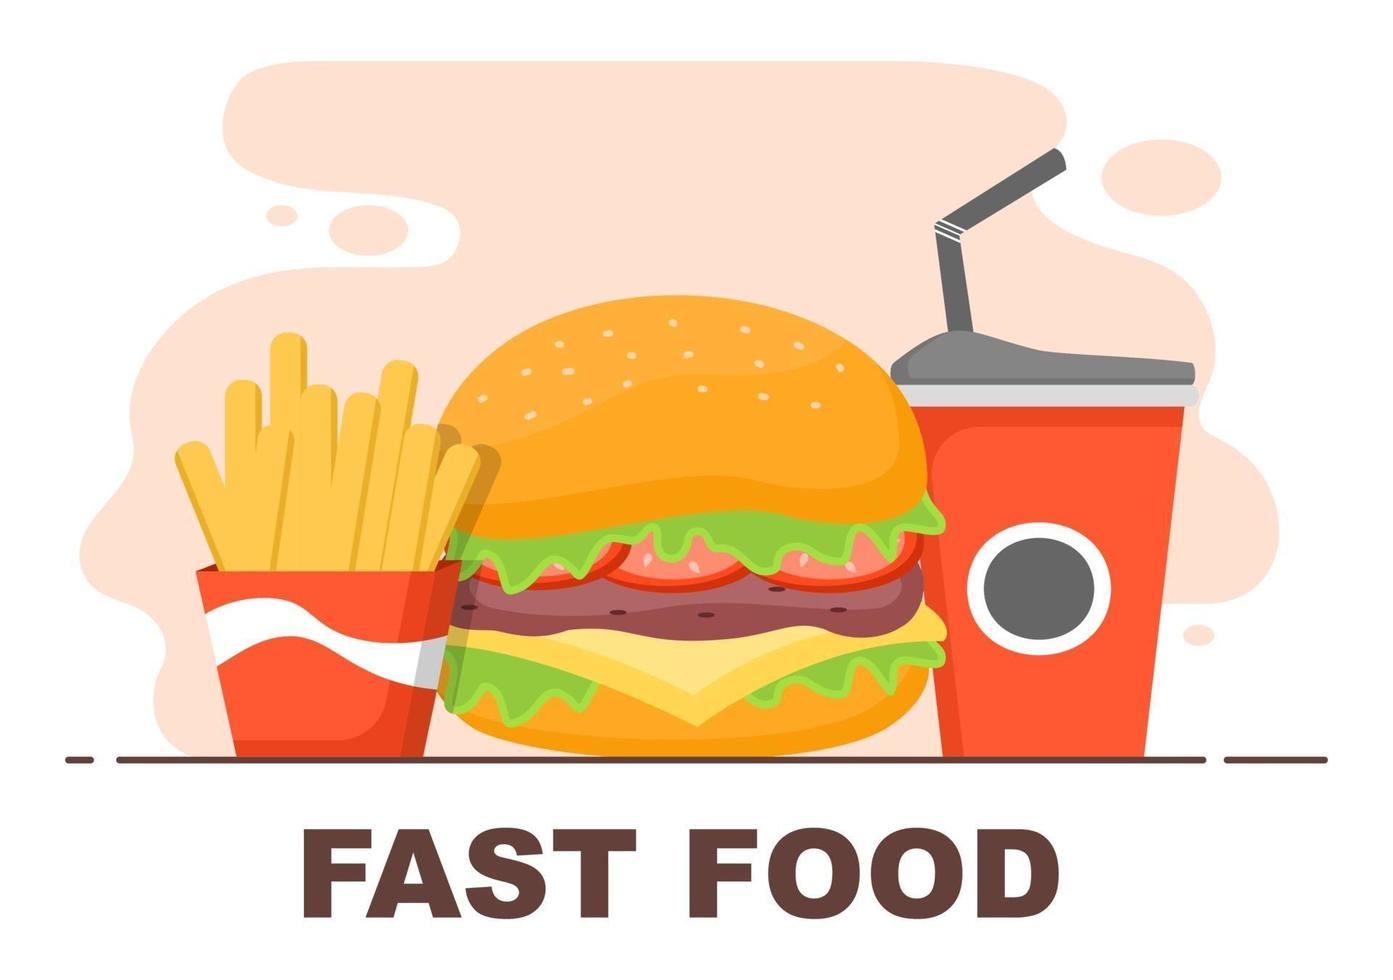 Set of Burger, Cola, and French Fries Fast food Background Vector